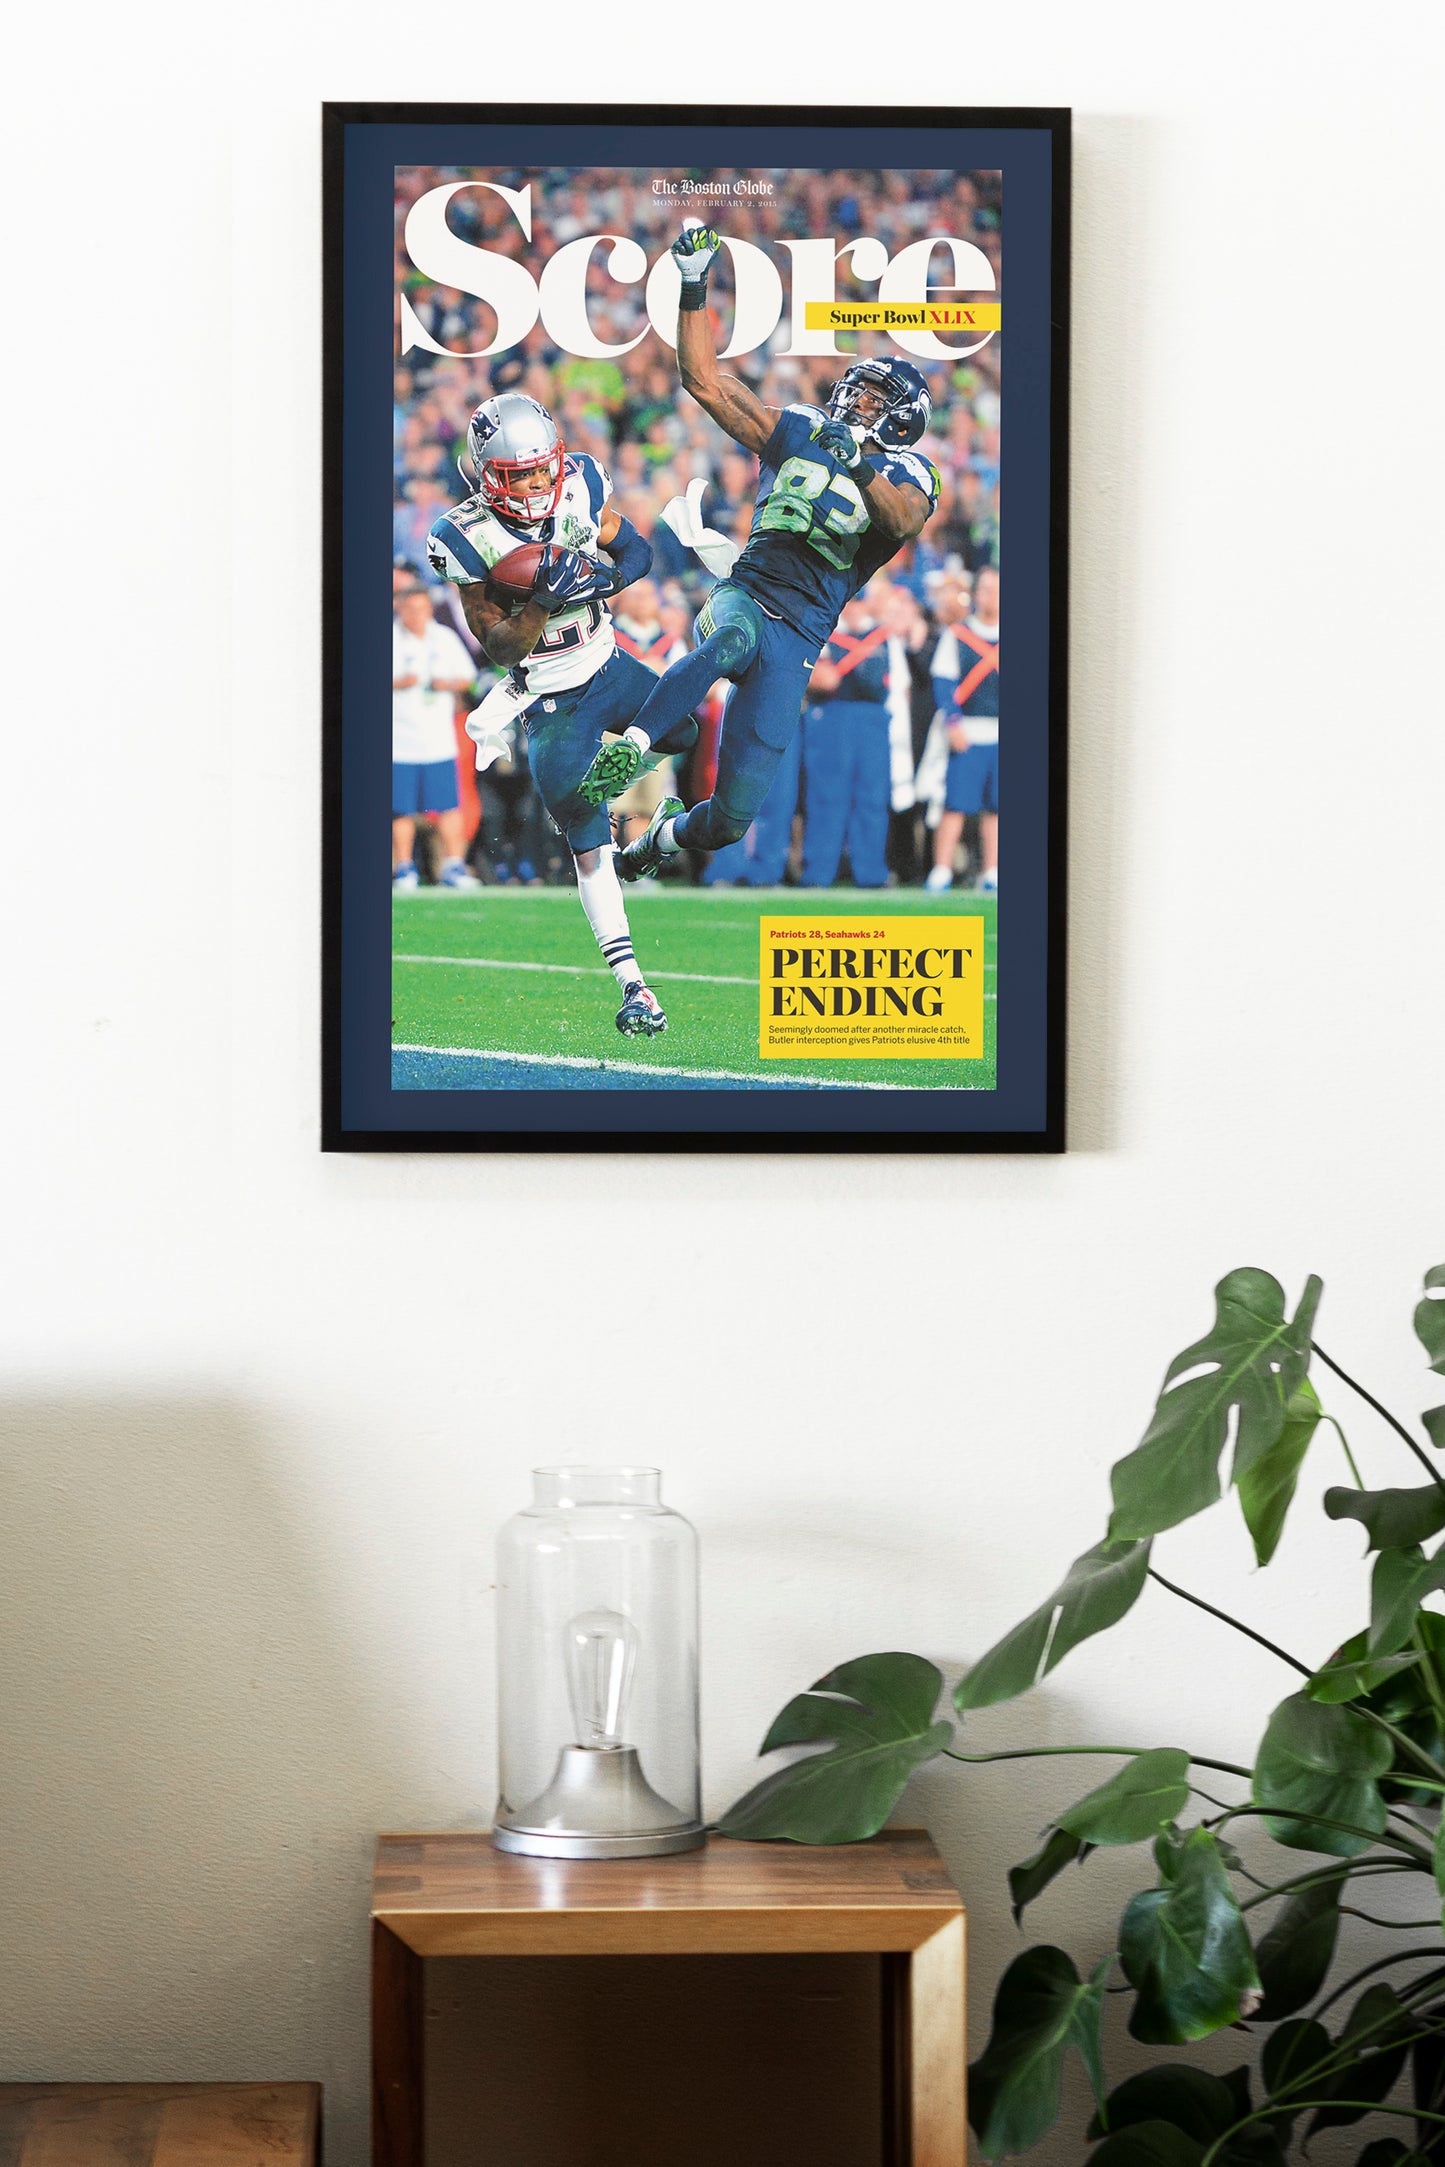 New England Patriots 2015 Super Bowl NFL Champions Front Cover The Boston Globe Newspaper Poster